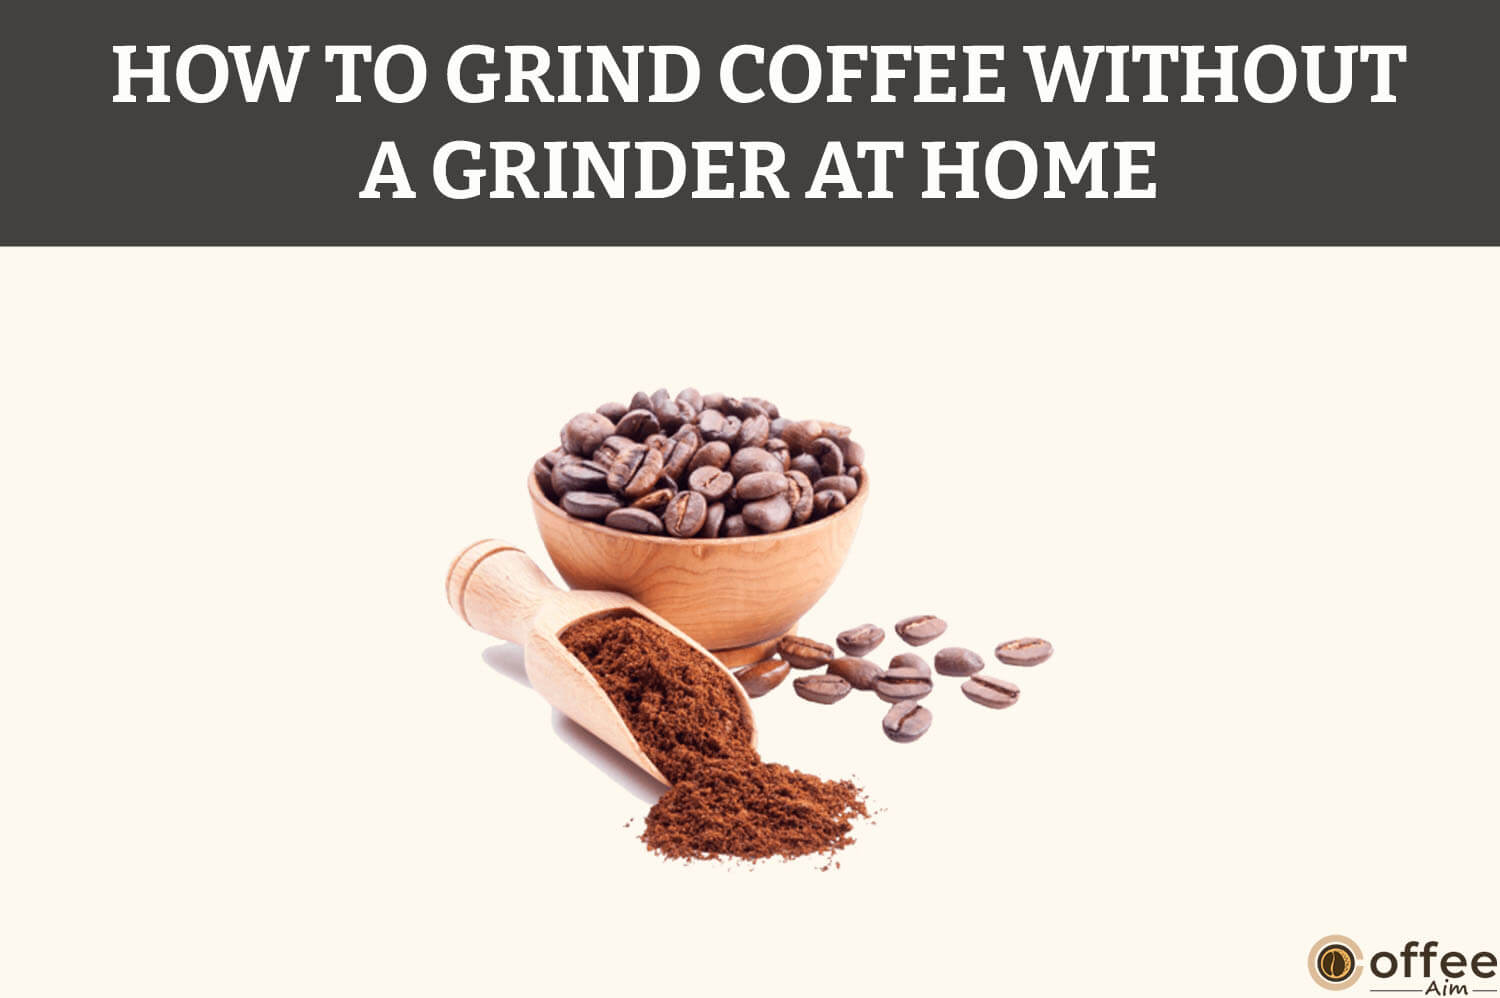 Featured image for the article "How to Grind Coffee Without a Grinder at Home"